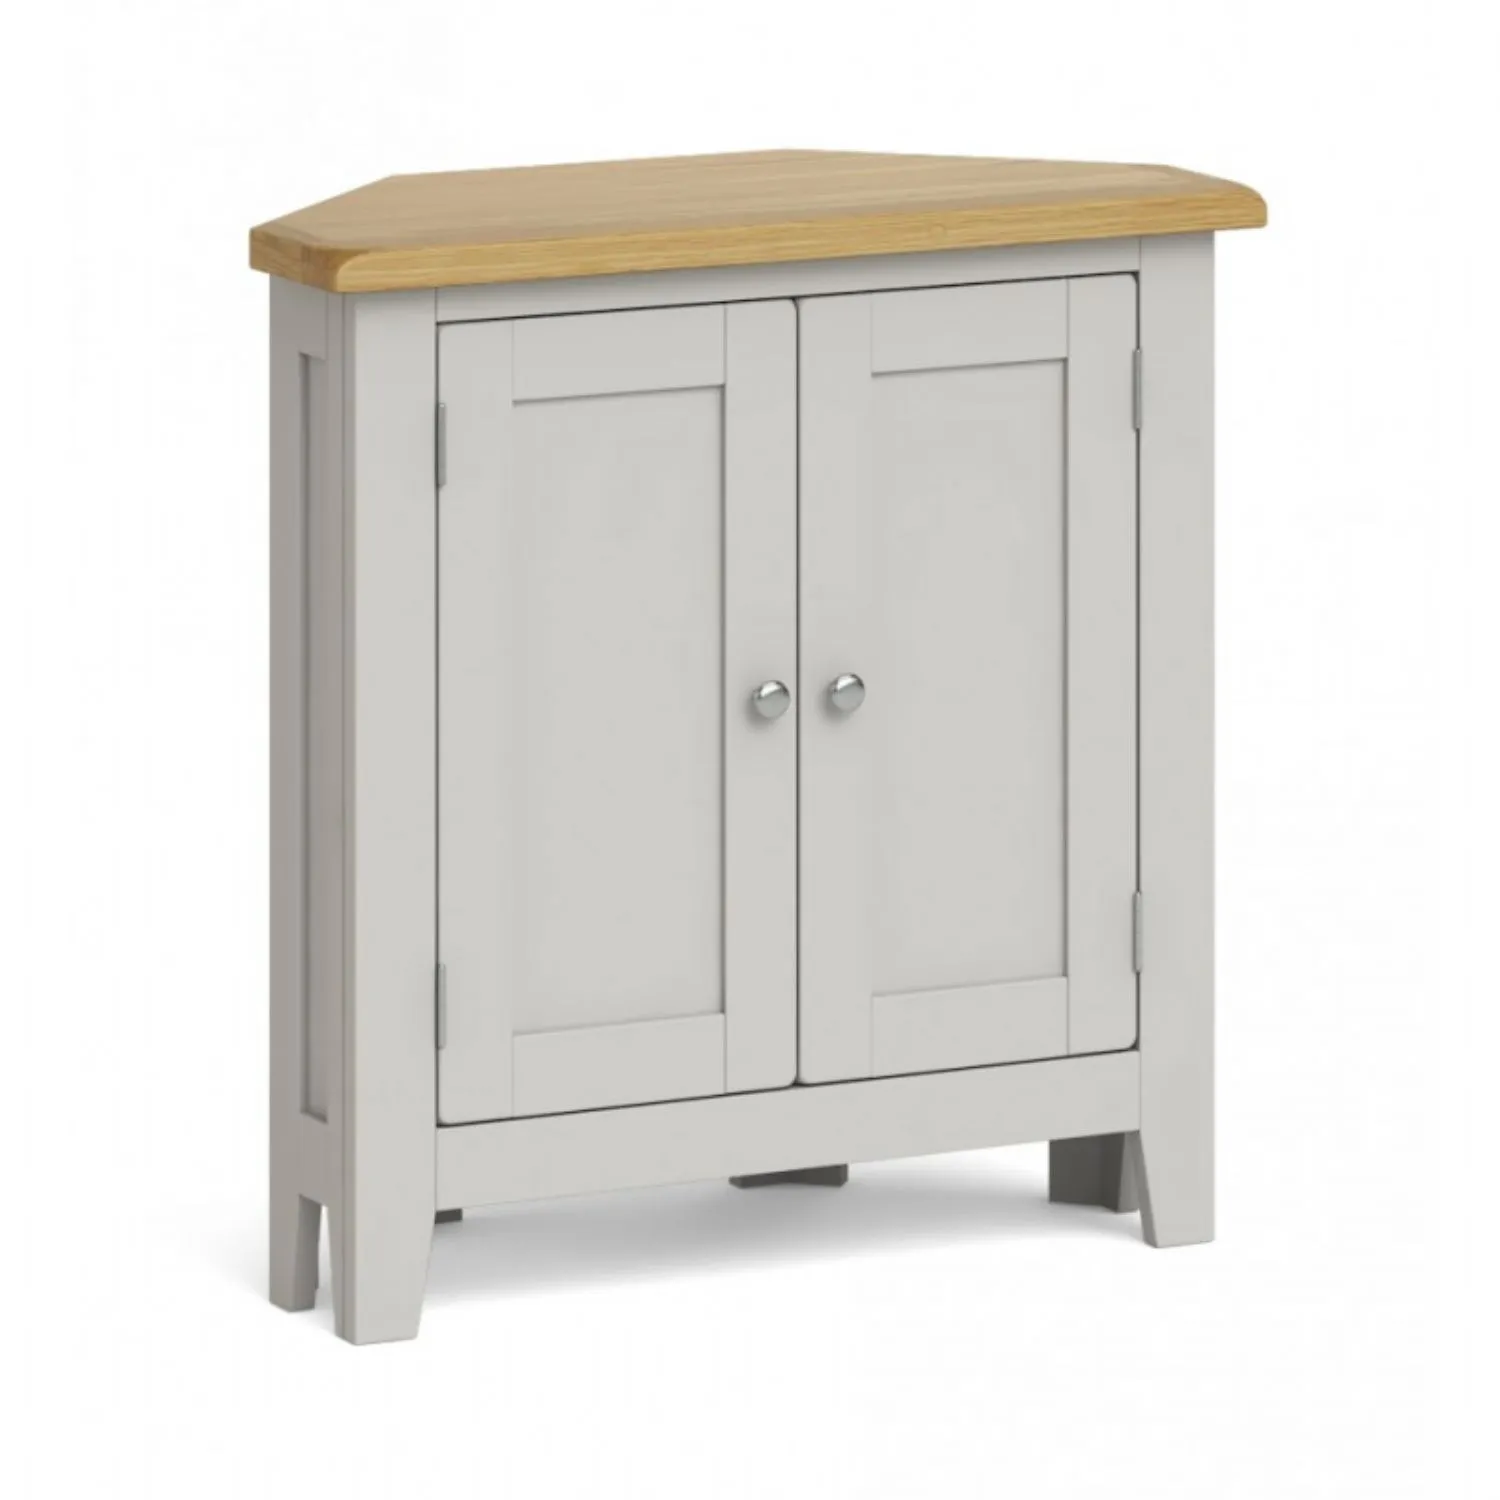 Solid Oak and Grey Painted Low Corner Cupboard